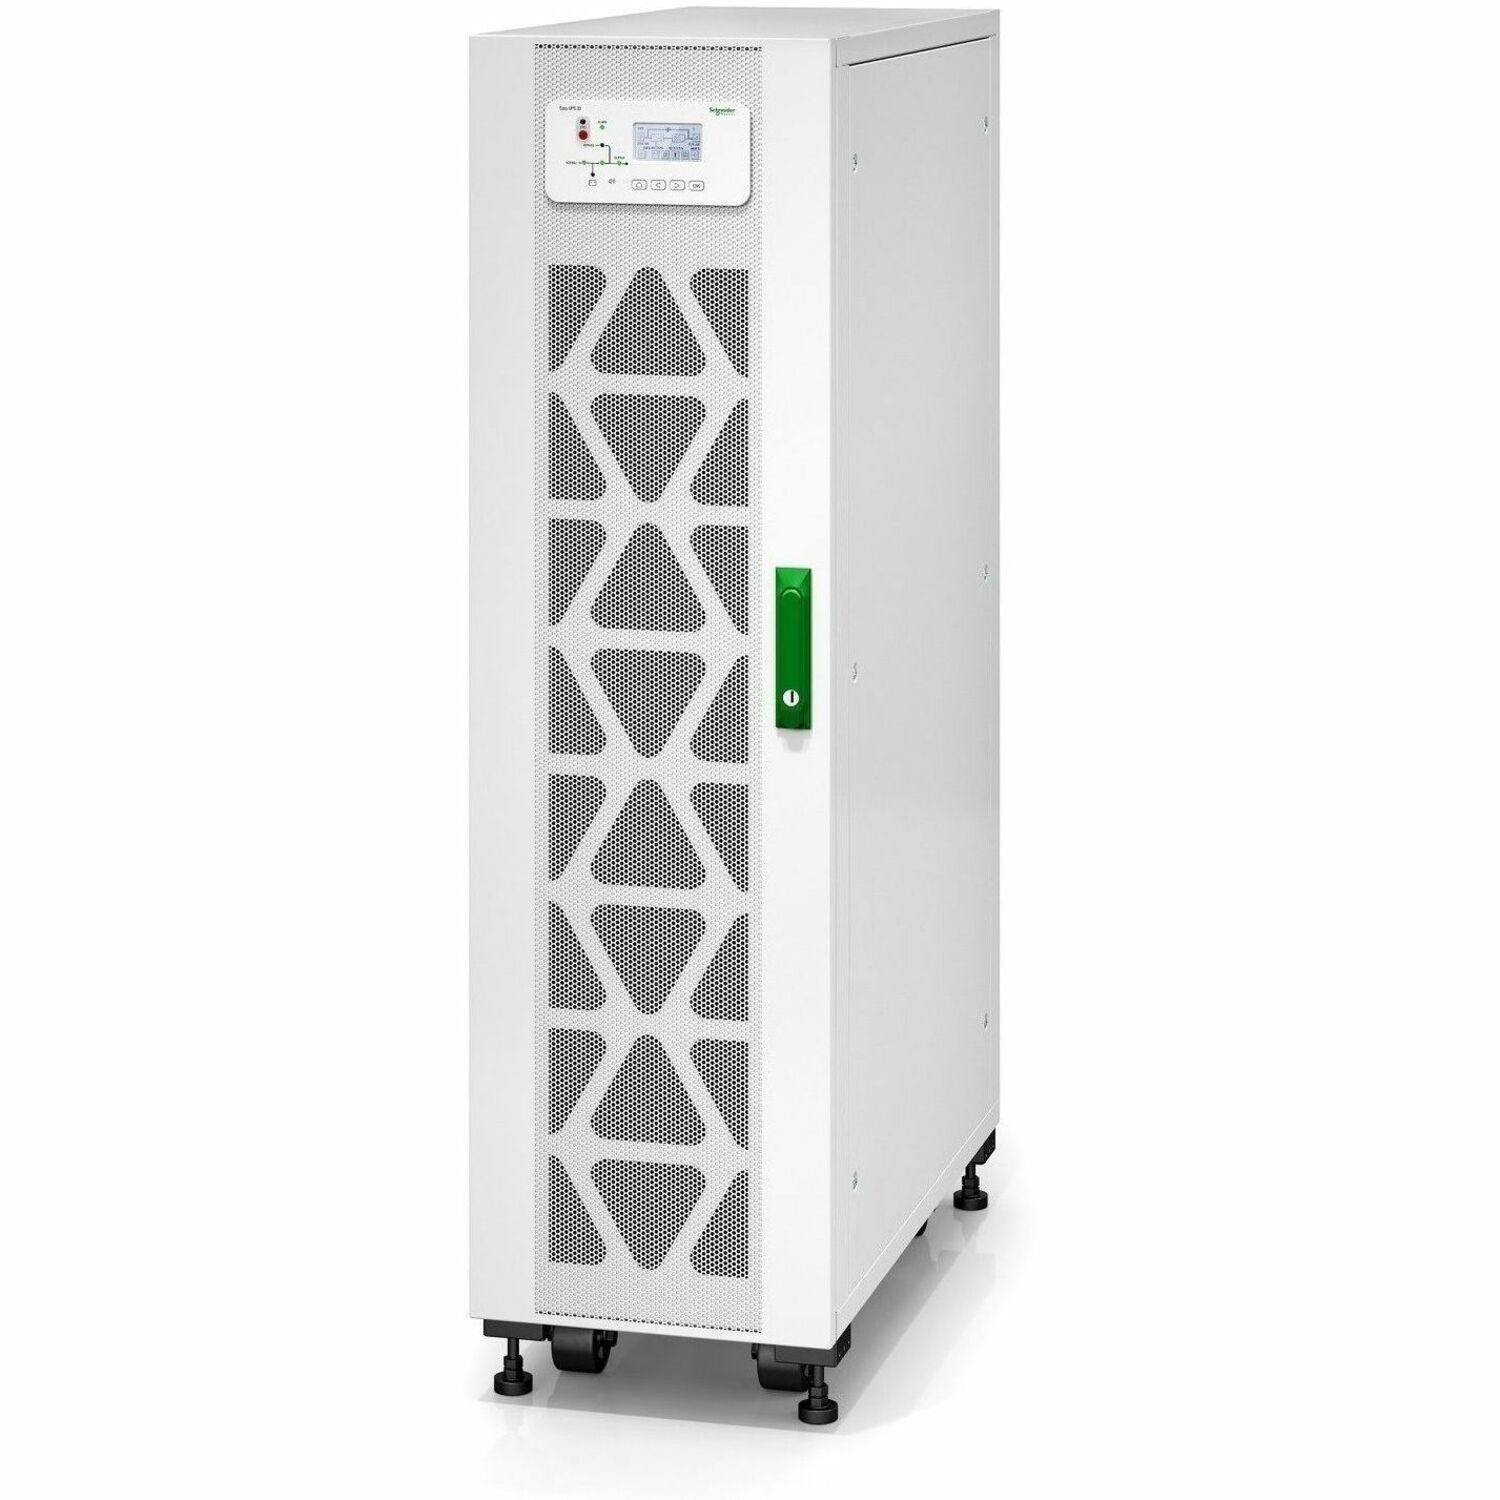 APC by Schneider Electric Easy UPS Double Conversion Online UPS - 10 kVA/10 kW - Three Phase